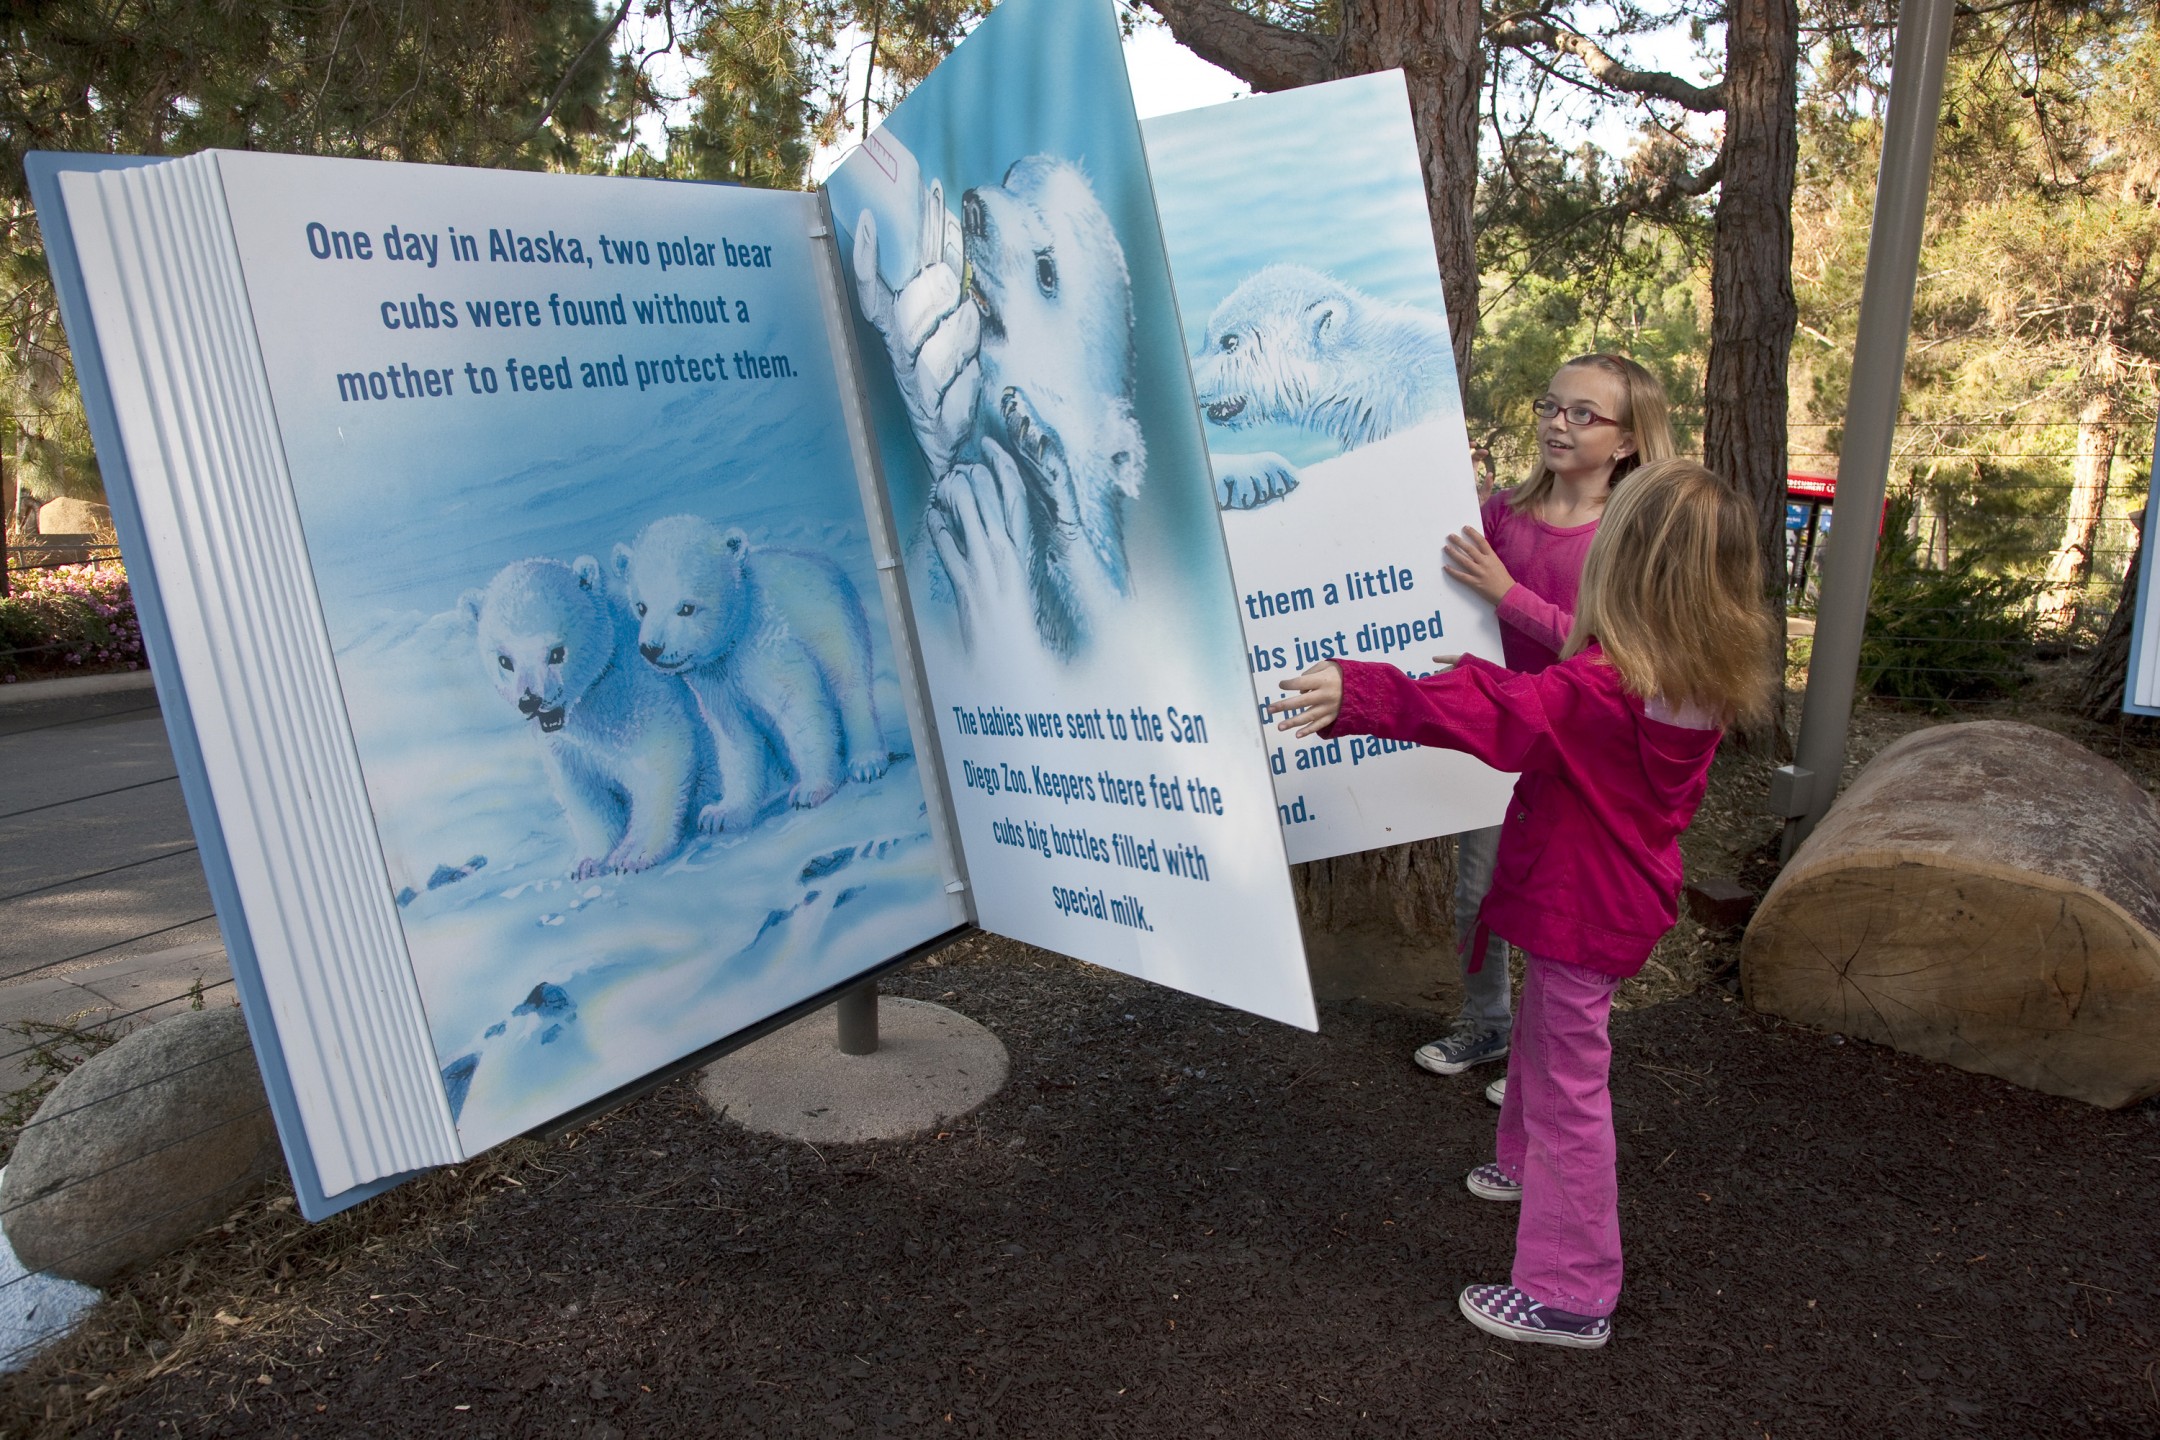 An oversized story book told a custom-written story about Kalluk and Tatqiq, the two orphaned cubs who had been rescued and brought to the San Diego Zoo.